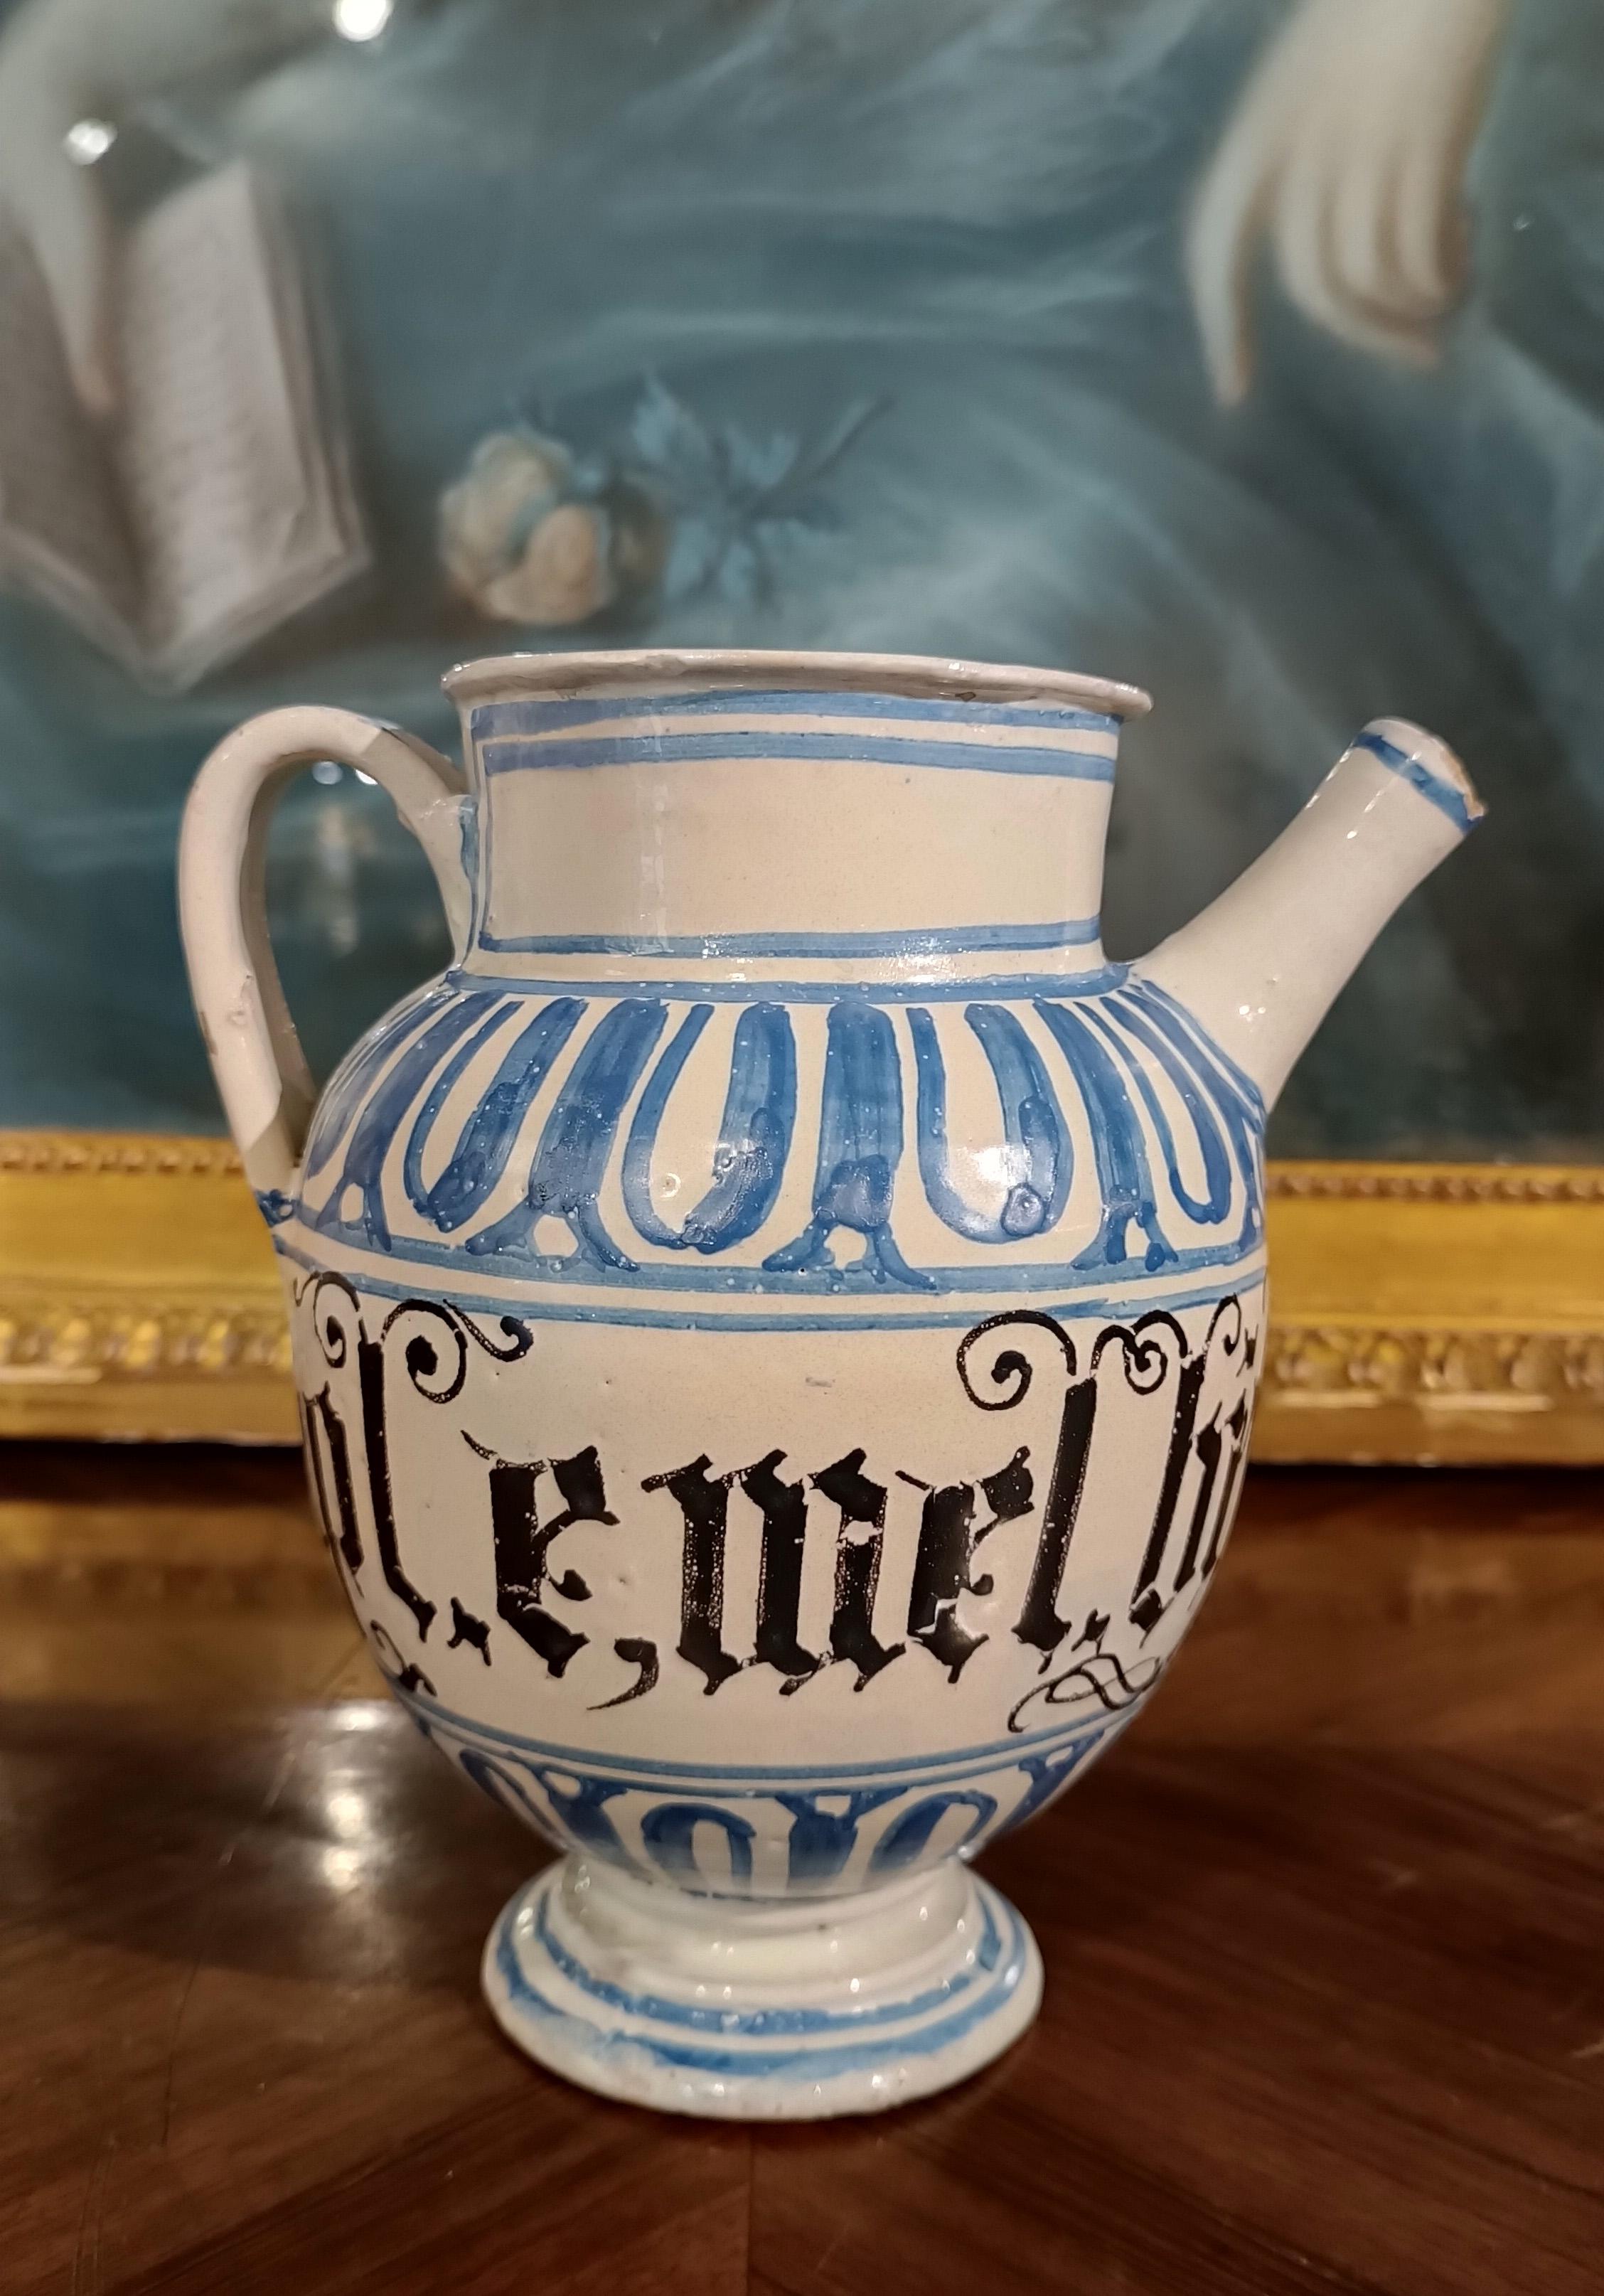 Beautiful blue and white glazed majolica jug, made in Faenza at the end of the 17th century. The jug is decorated with motifs painted in blue that recall the style of archaic majolica of the thirteenth and fourteenth centuries, with spirals and